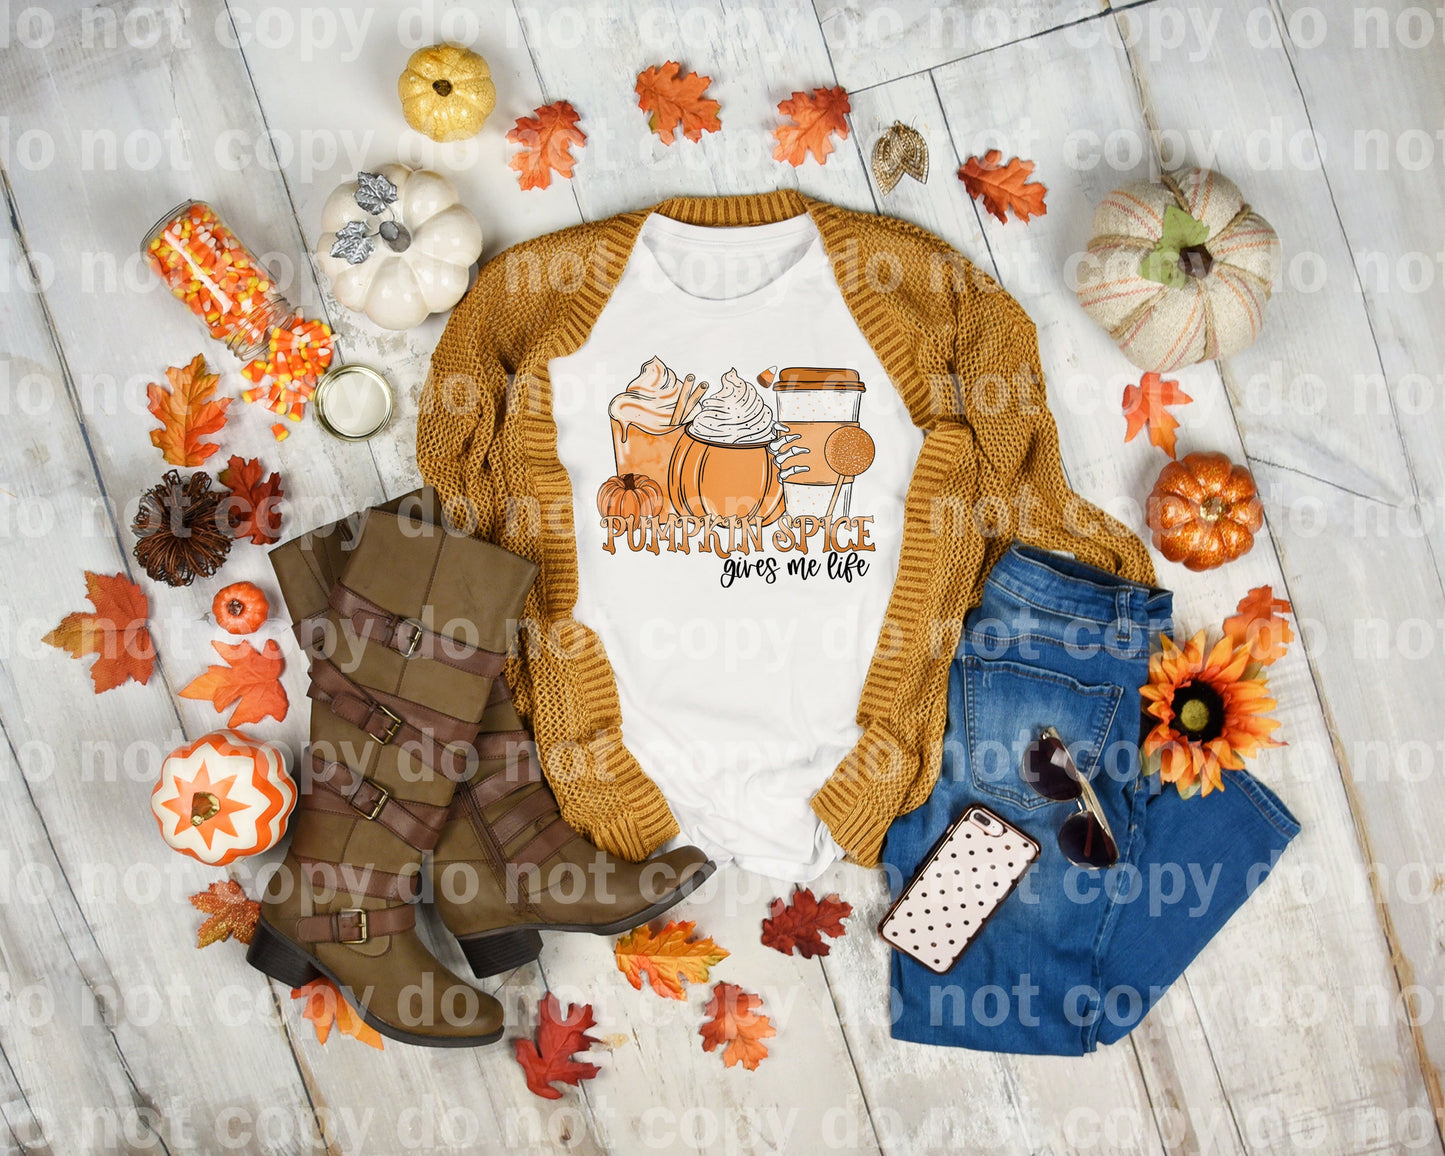 Pumpkin Spice Gives Me Life Dream Print or Sublimation Print